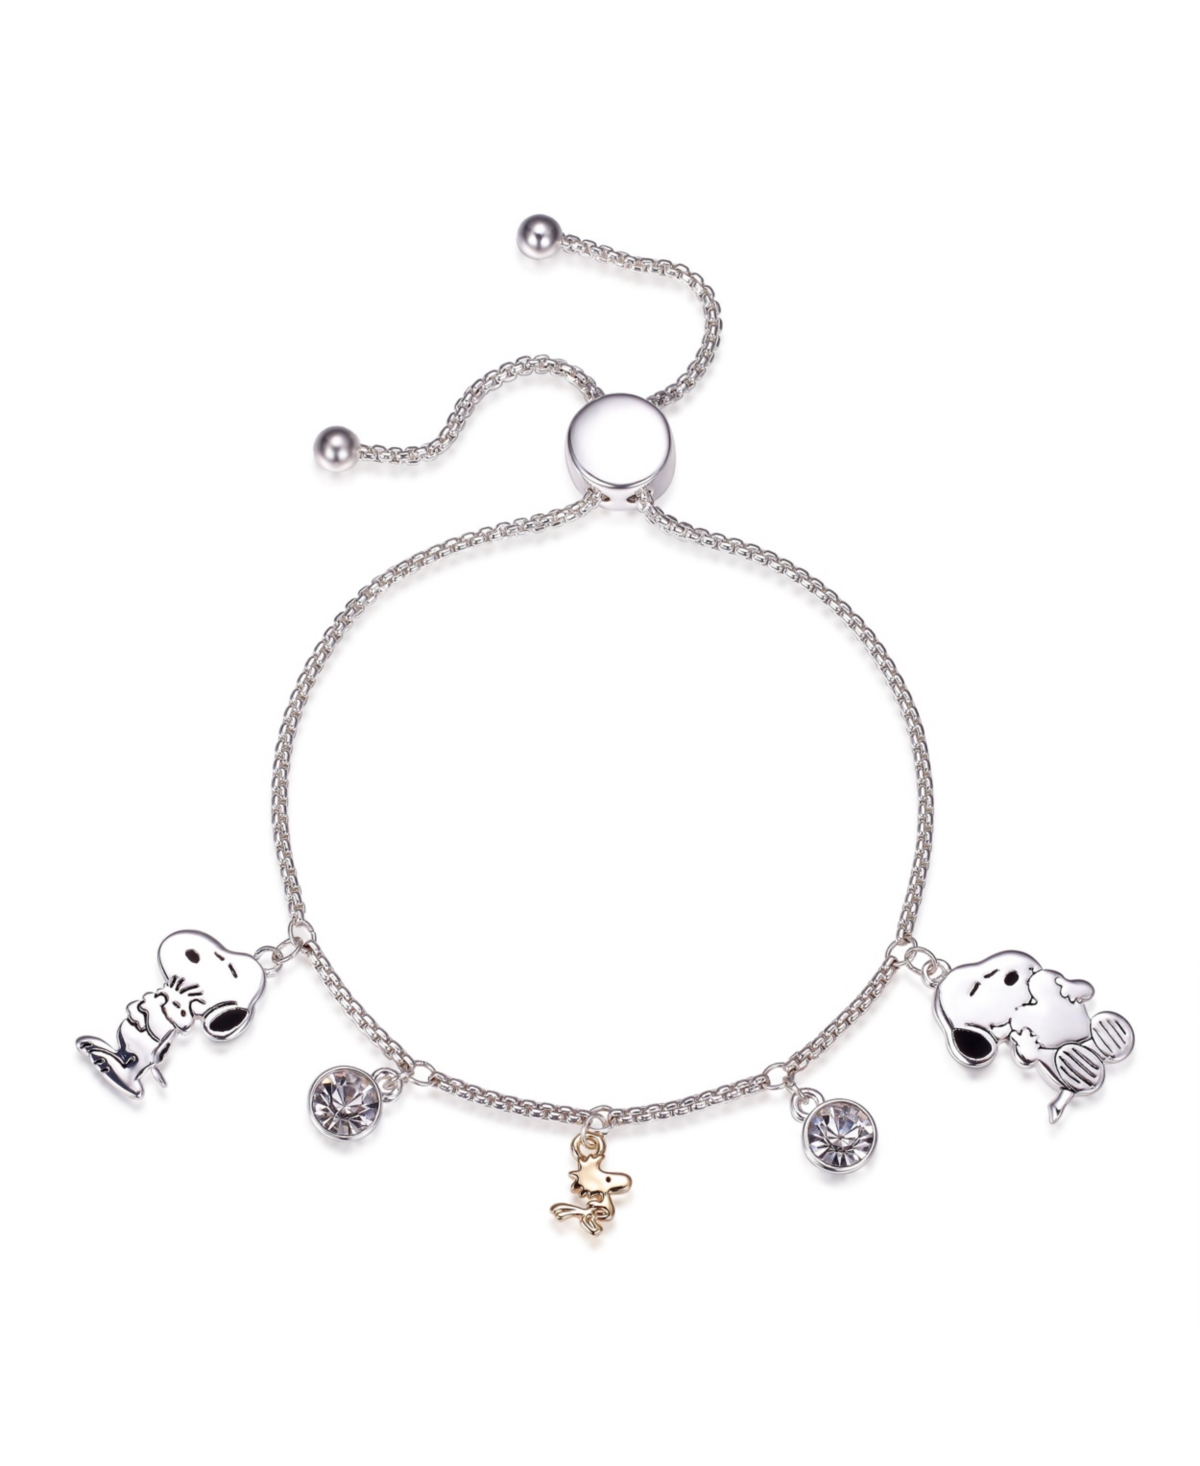 "Snoopy" and "Woodstock" Crystal Adjustable Bolo Silver Plated Bracelet, Created for Macy's - Silver